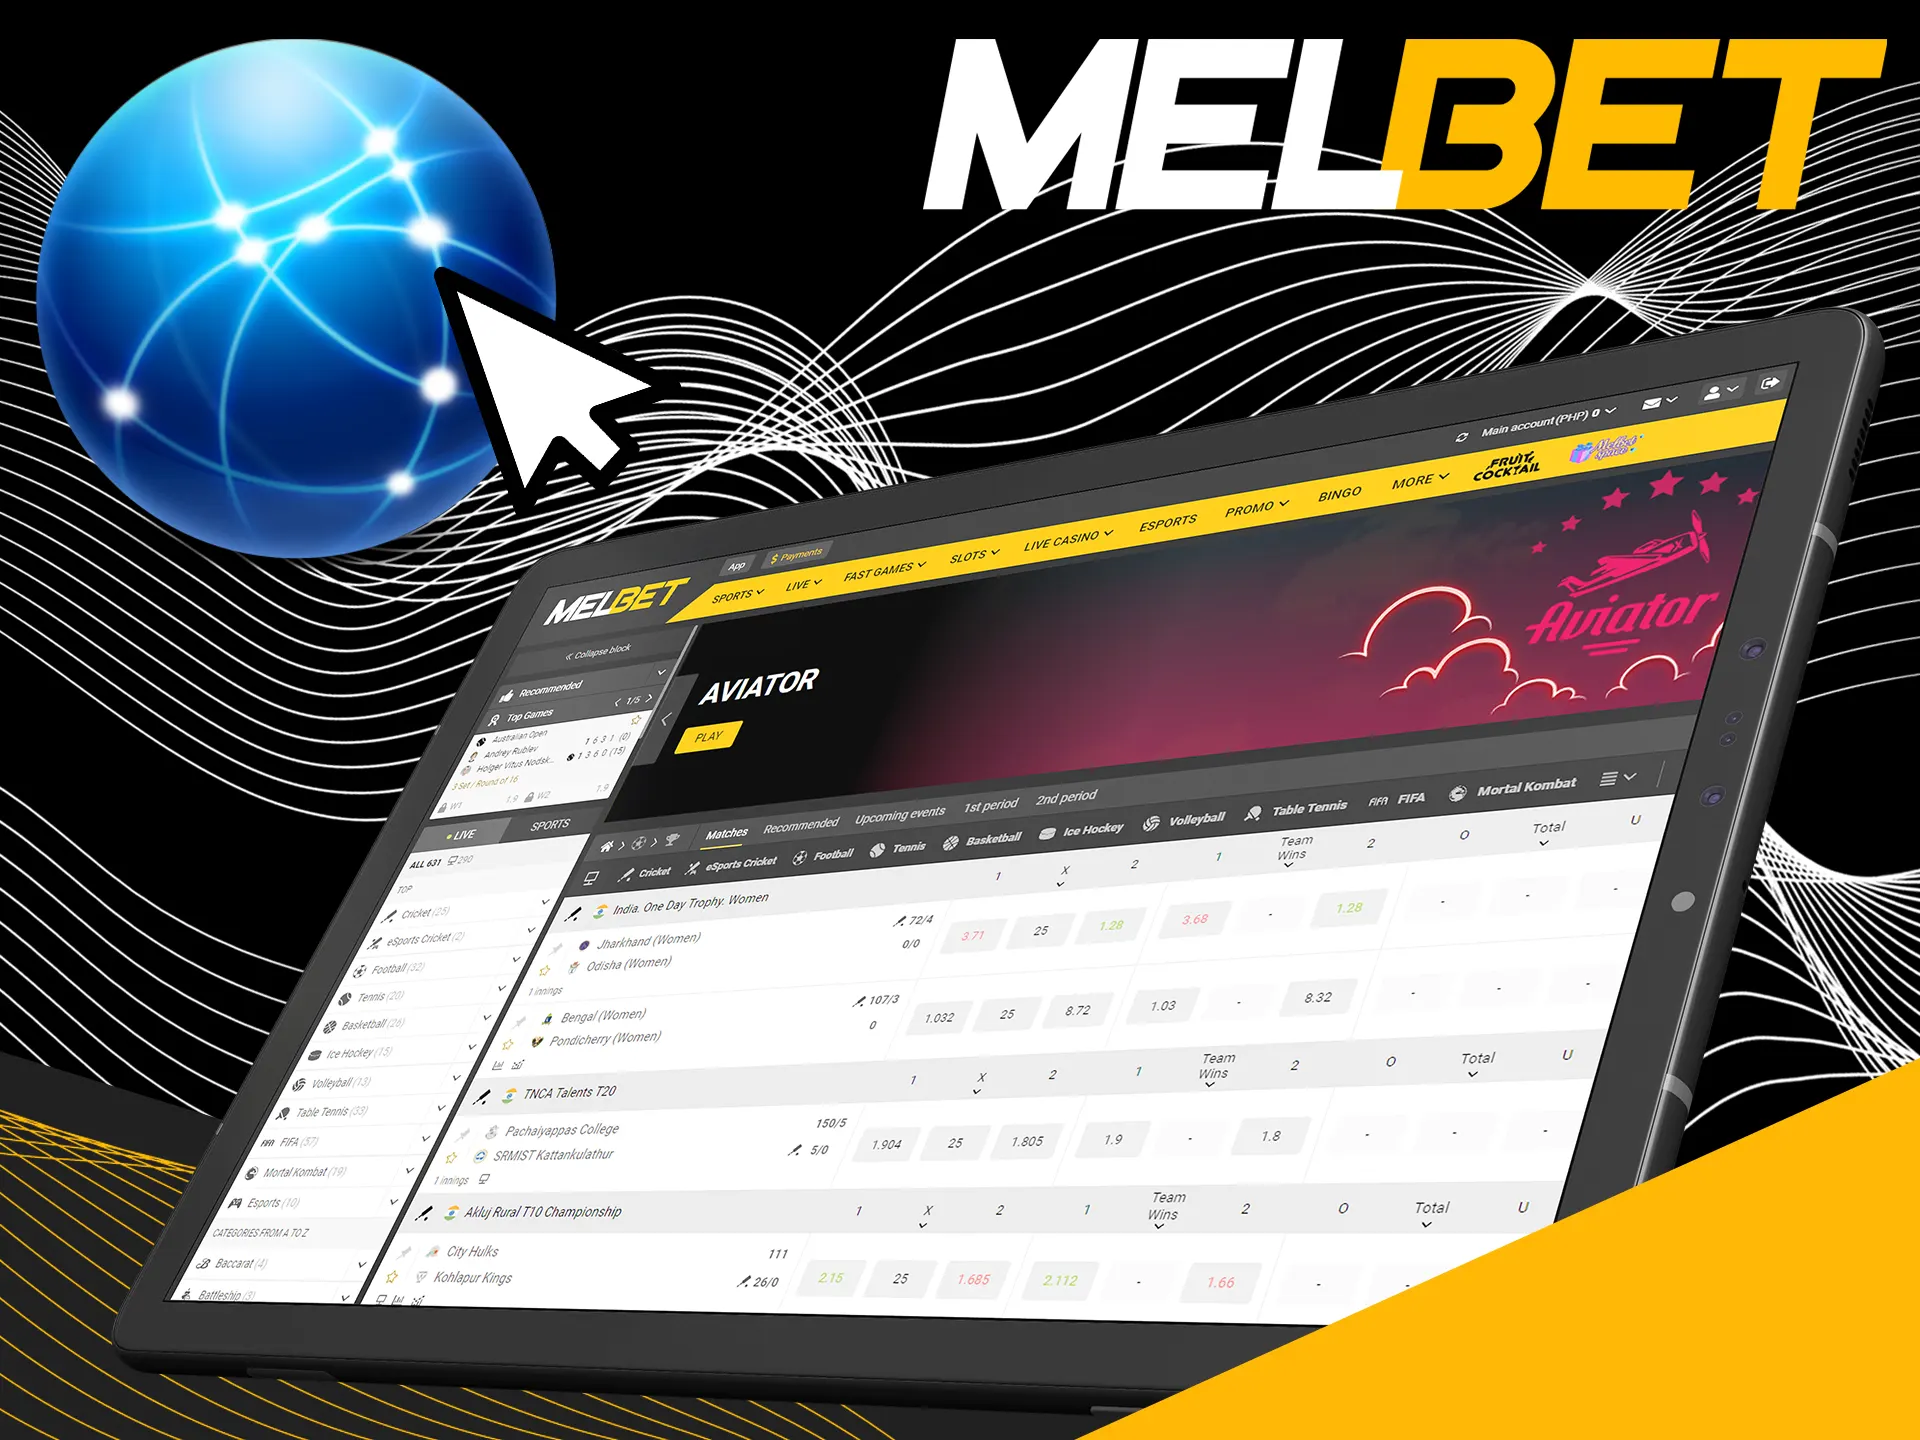 You can use web version of Melbet website on any device.